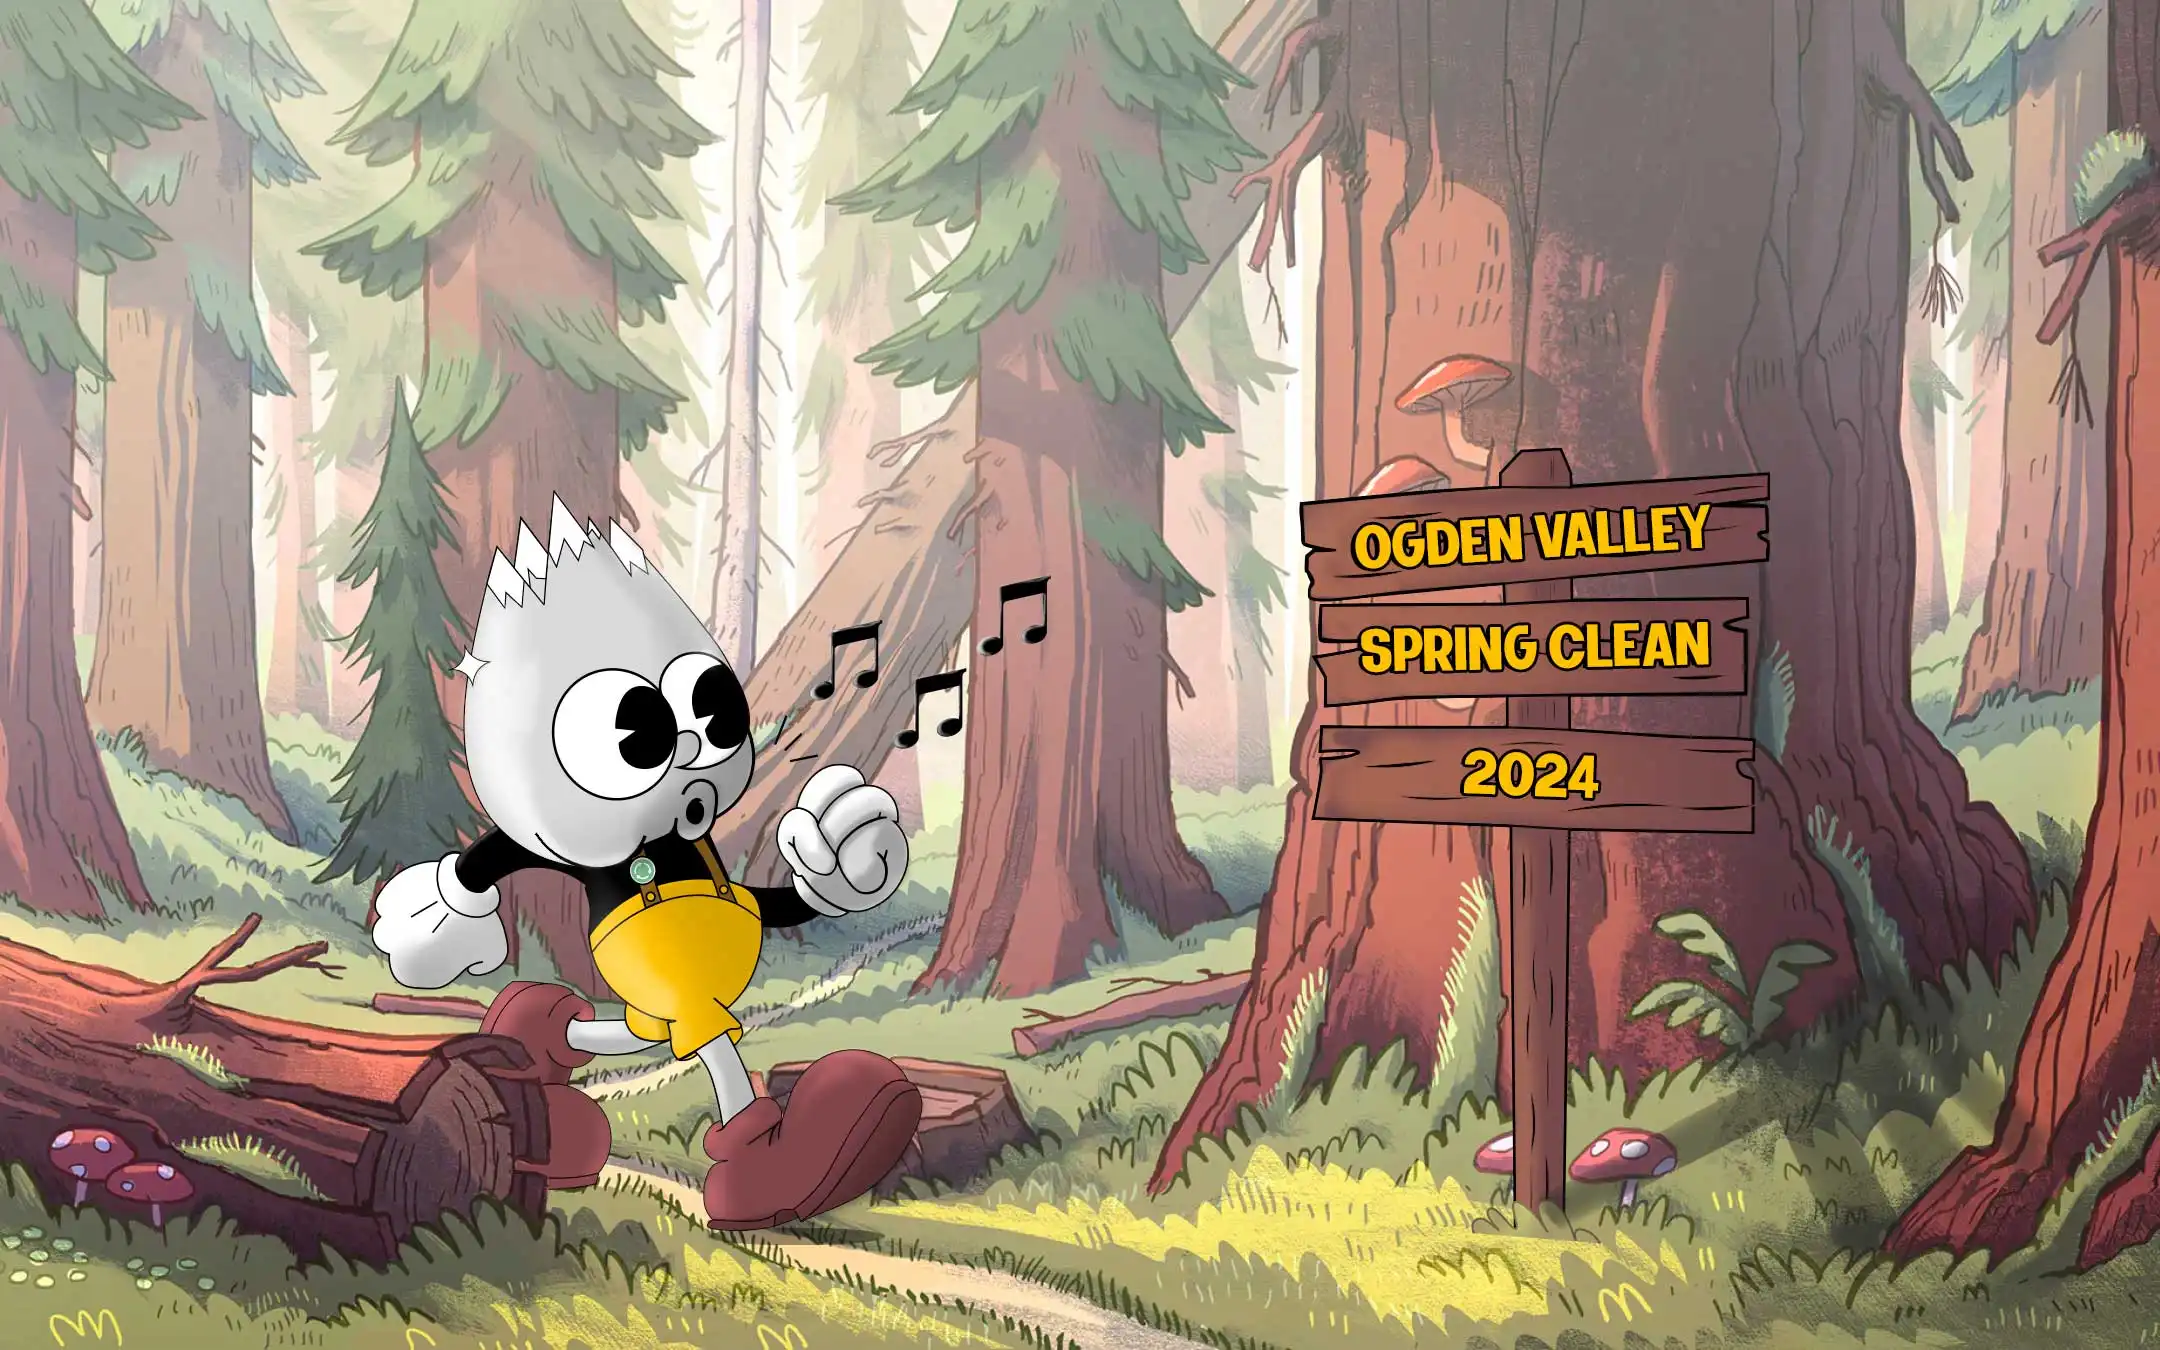 An illustration of a whistling mountain walking past a sign that reads, "Ogden Valley Spring Clean 2024".